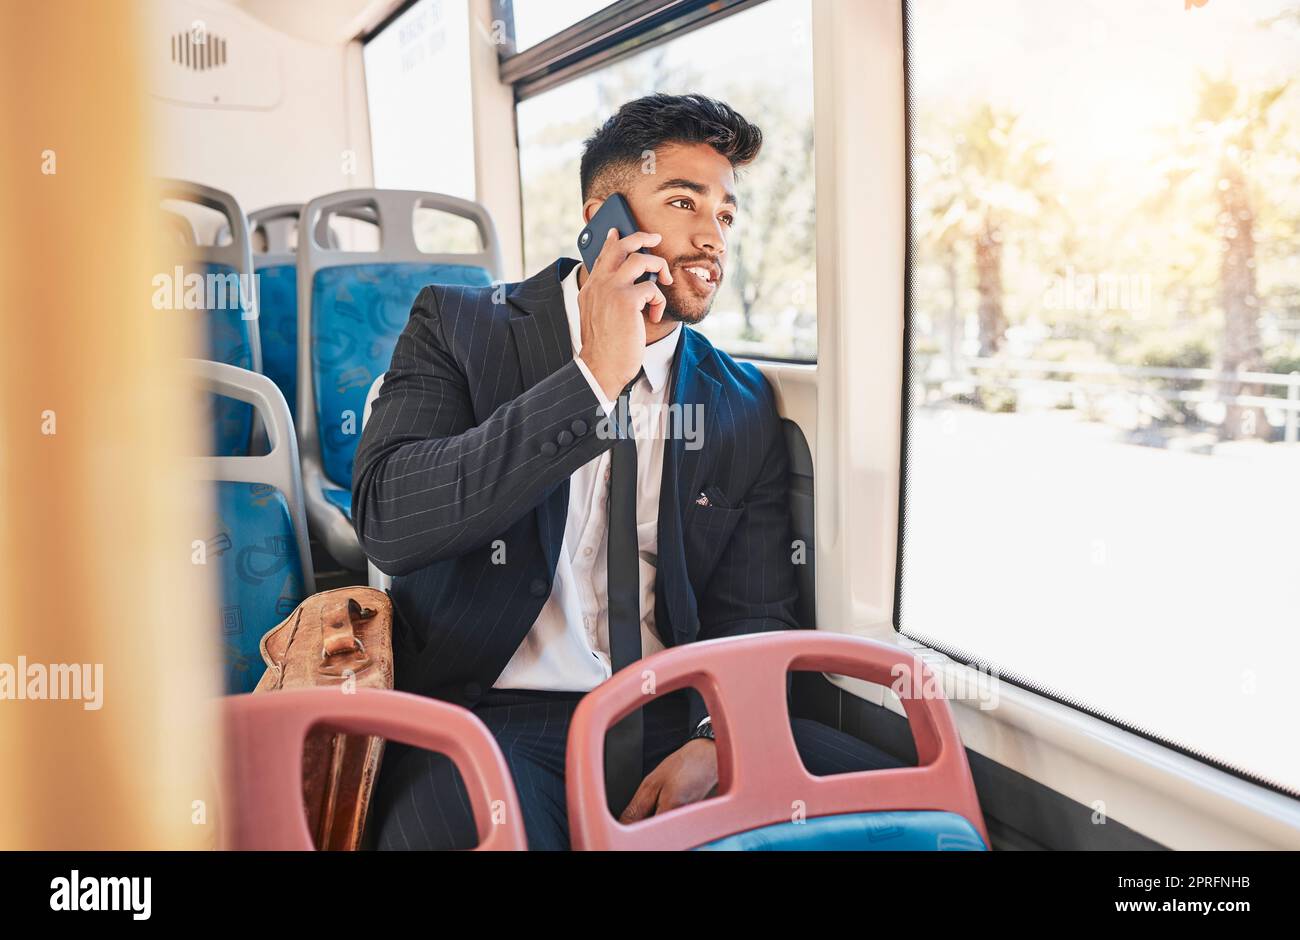 Phone, travel or communication with a business man talking and networking on a bus, public transport and commuting in a city. 5g mobile technology with a young worker having a conversation on a call Stock Photo